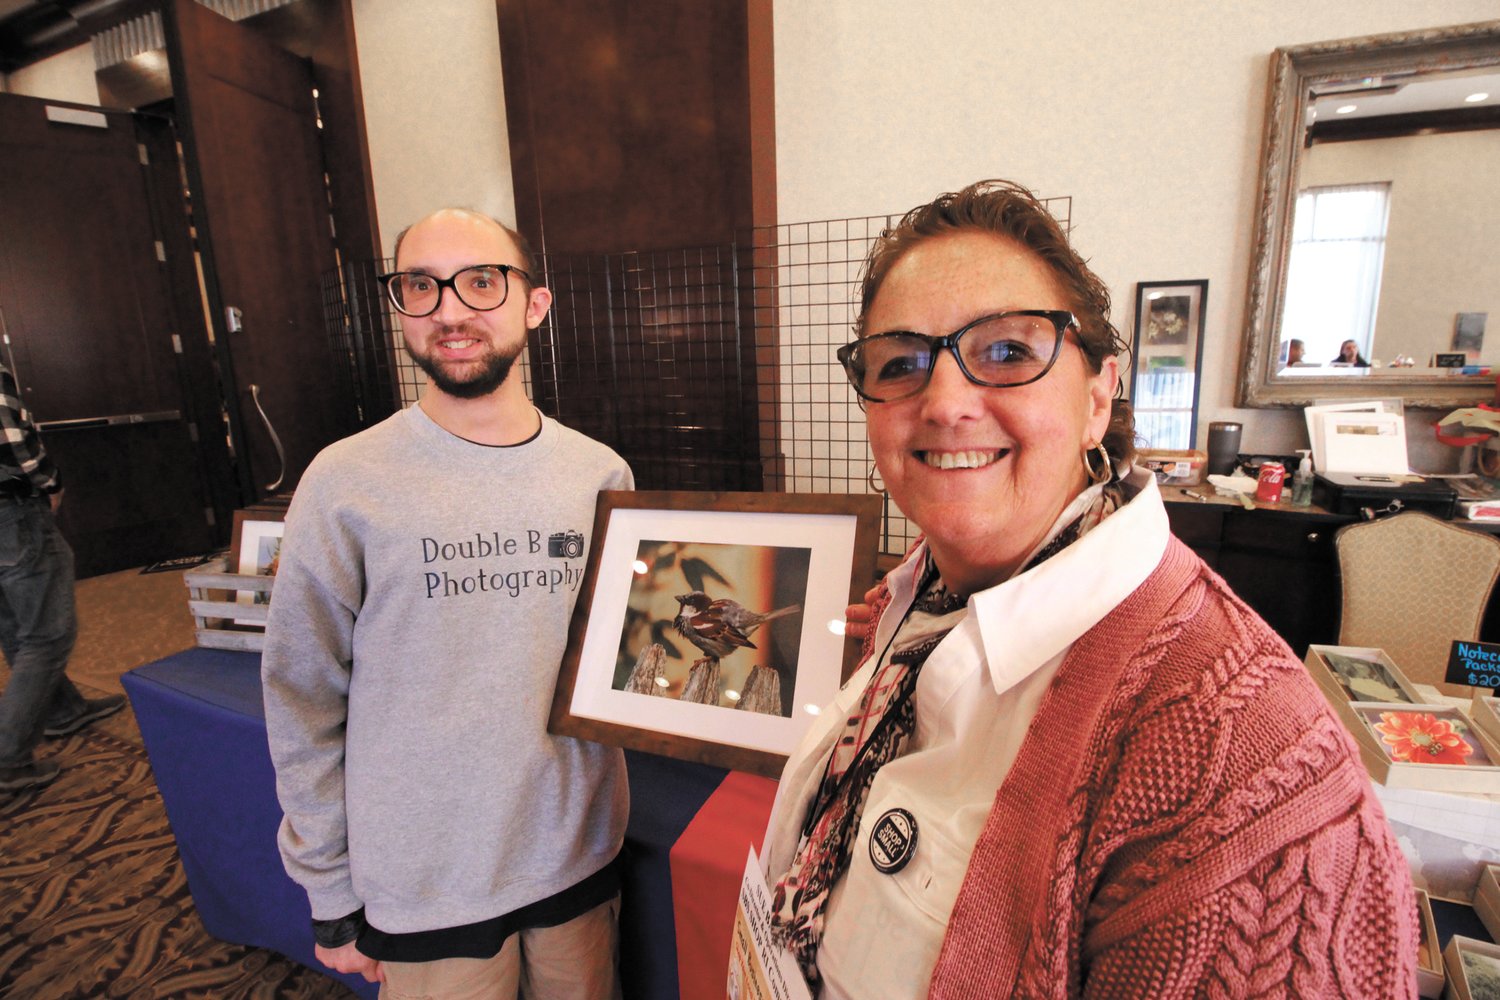 BIRDS ARE HIS FAVORITE:  Bryan Baron, owner of Double B Photography, one of 32 entrepreneurs with disabilities at Small Business Saturday shows off one of his works to Sue Babin, co-chair of the event hosted by the Rhode Island Disabilities Council.